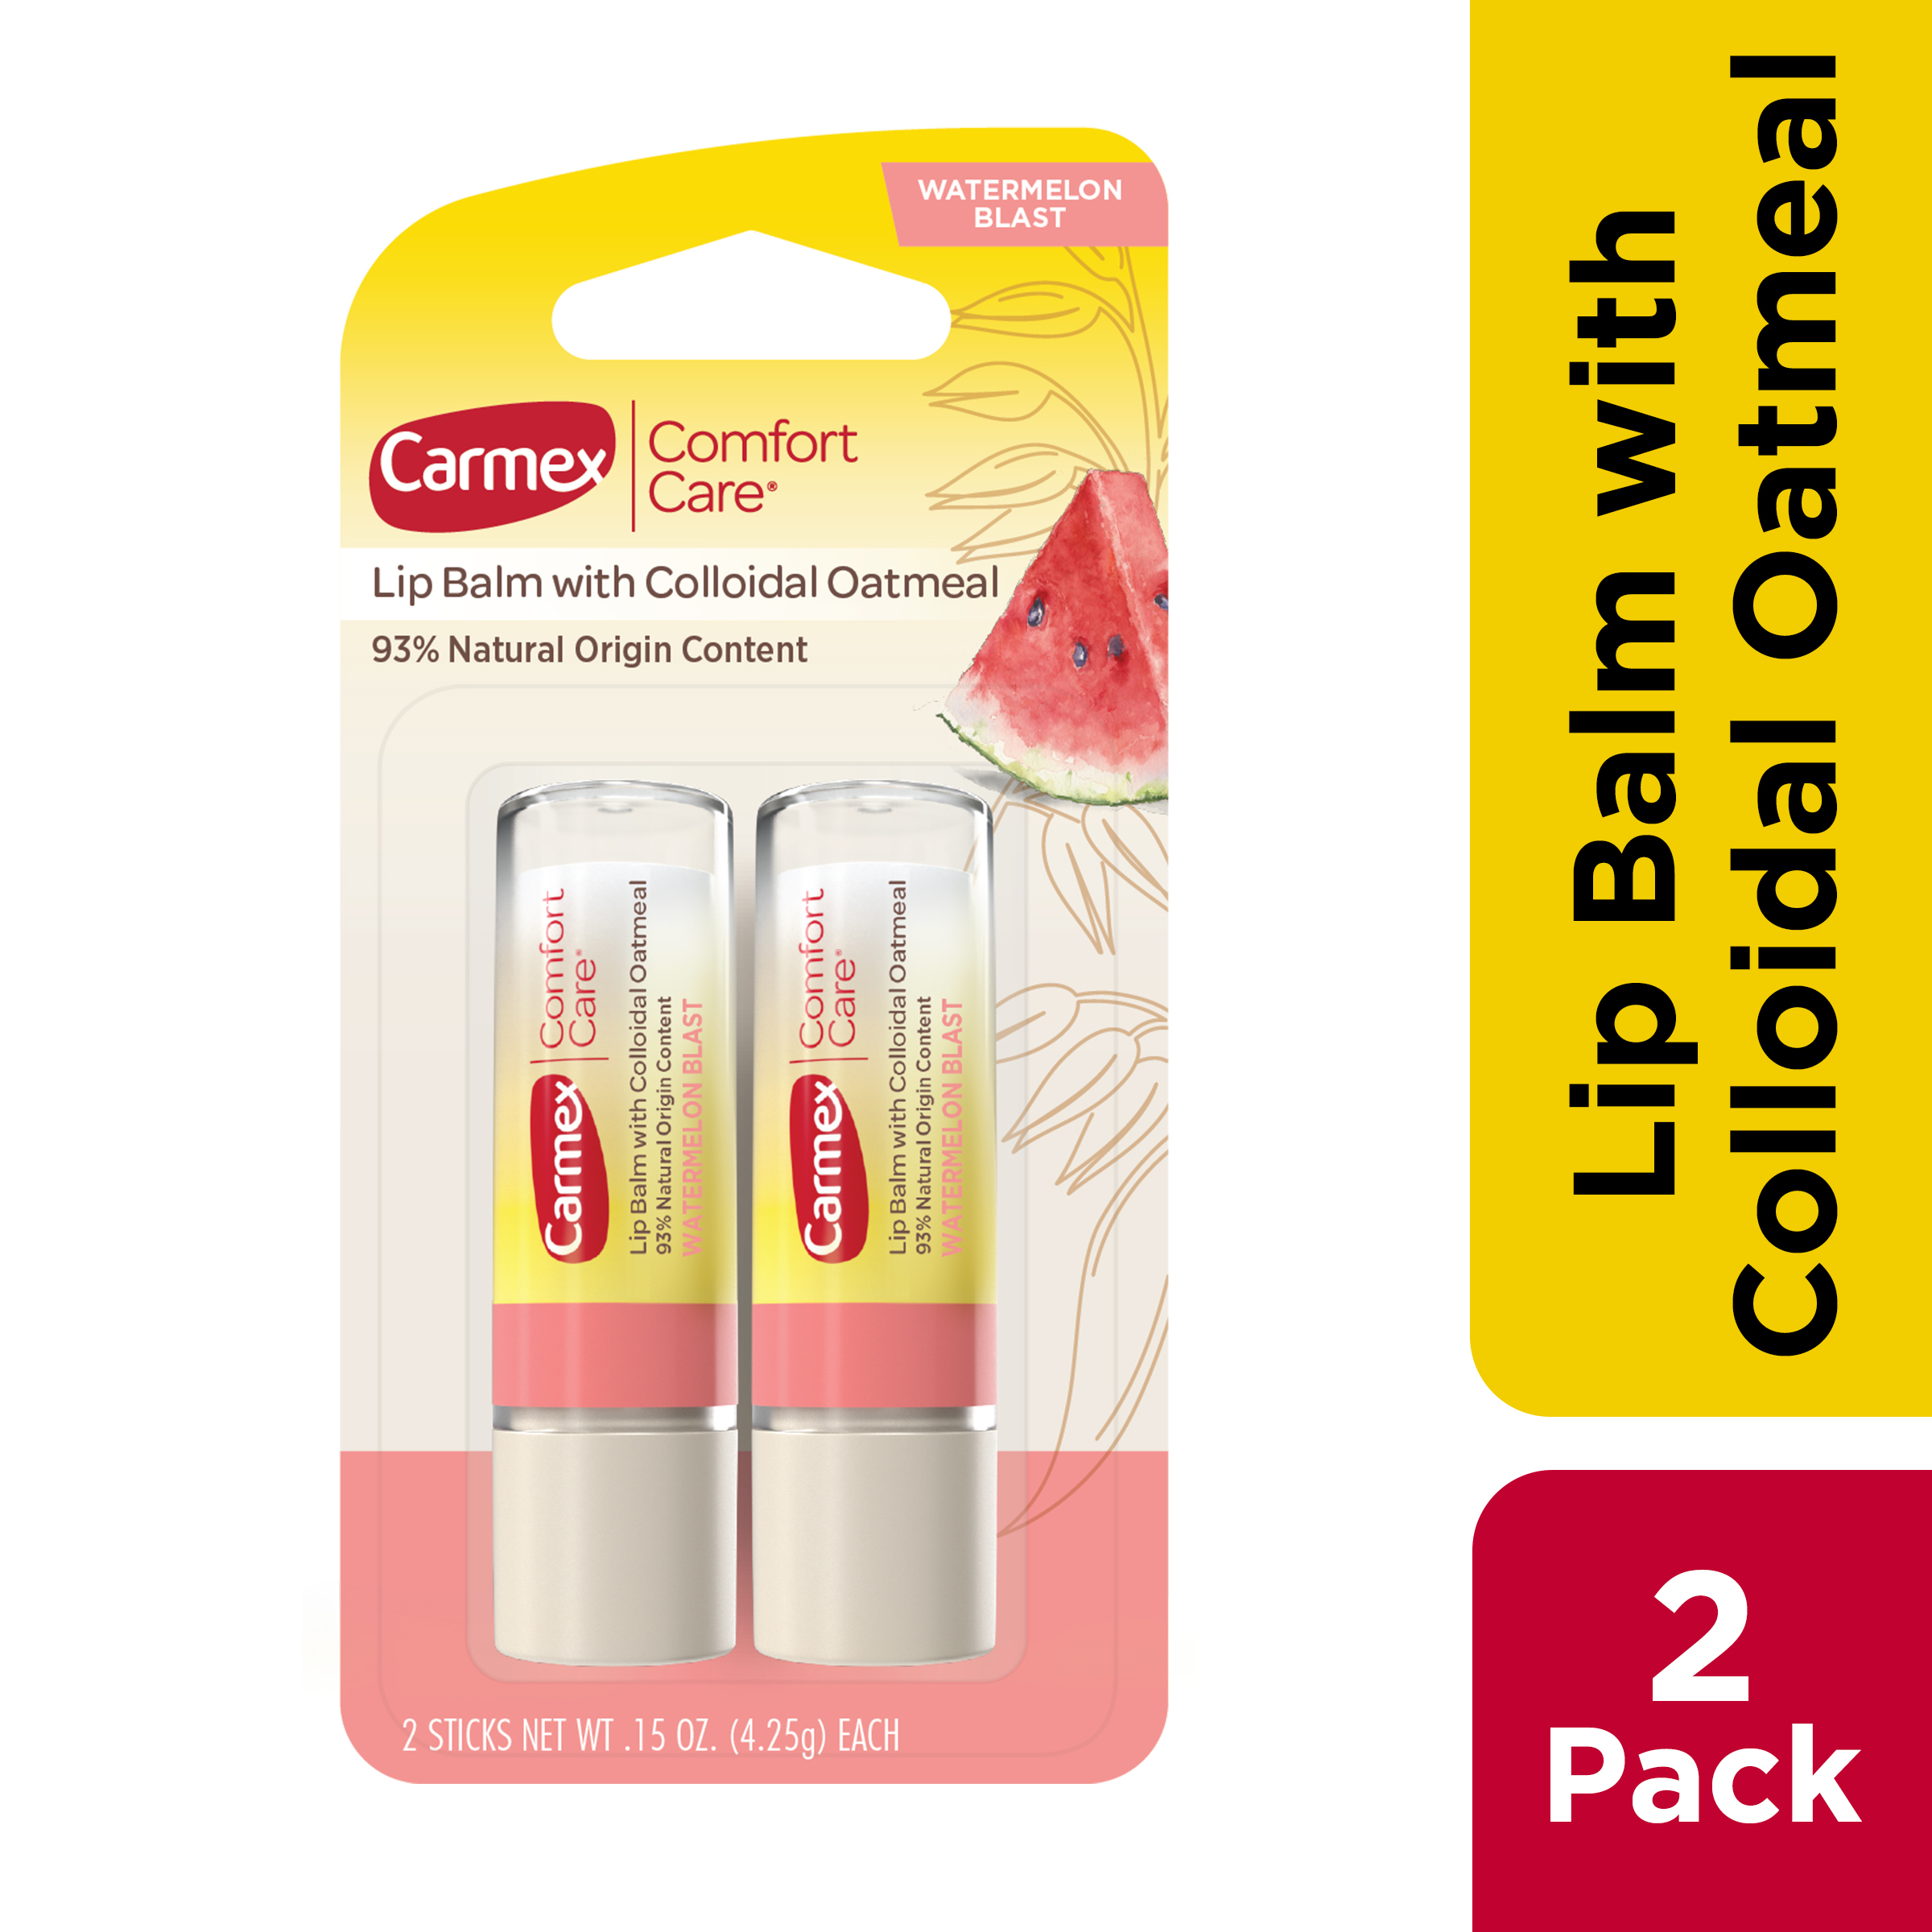 Carmex Comfort Care Lip Balm Sticks with Colloidal Oatmeal, Watermelon, 2 Count (1 Pack of 2) - image 1 of 11